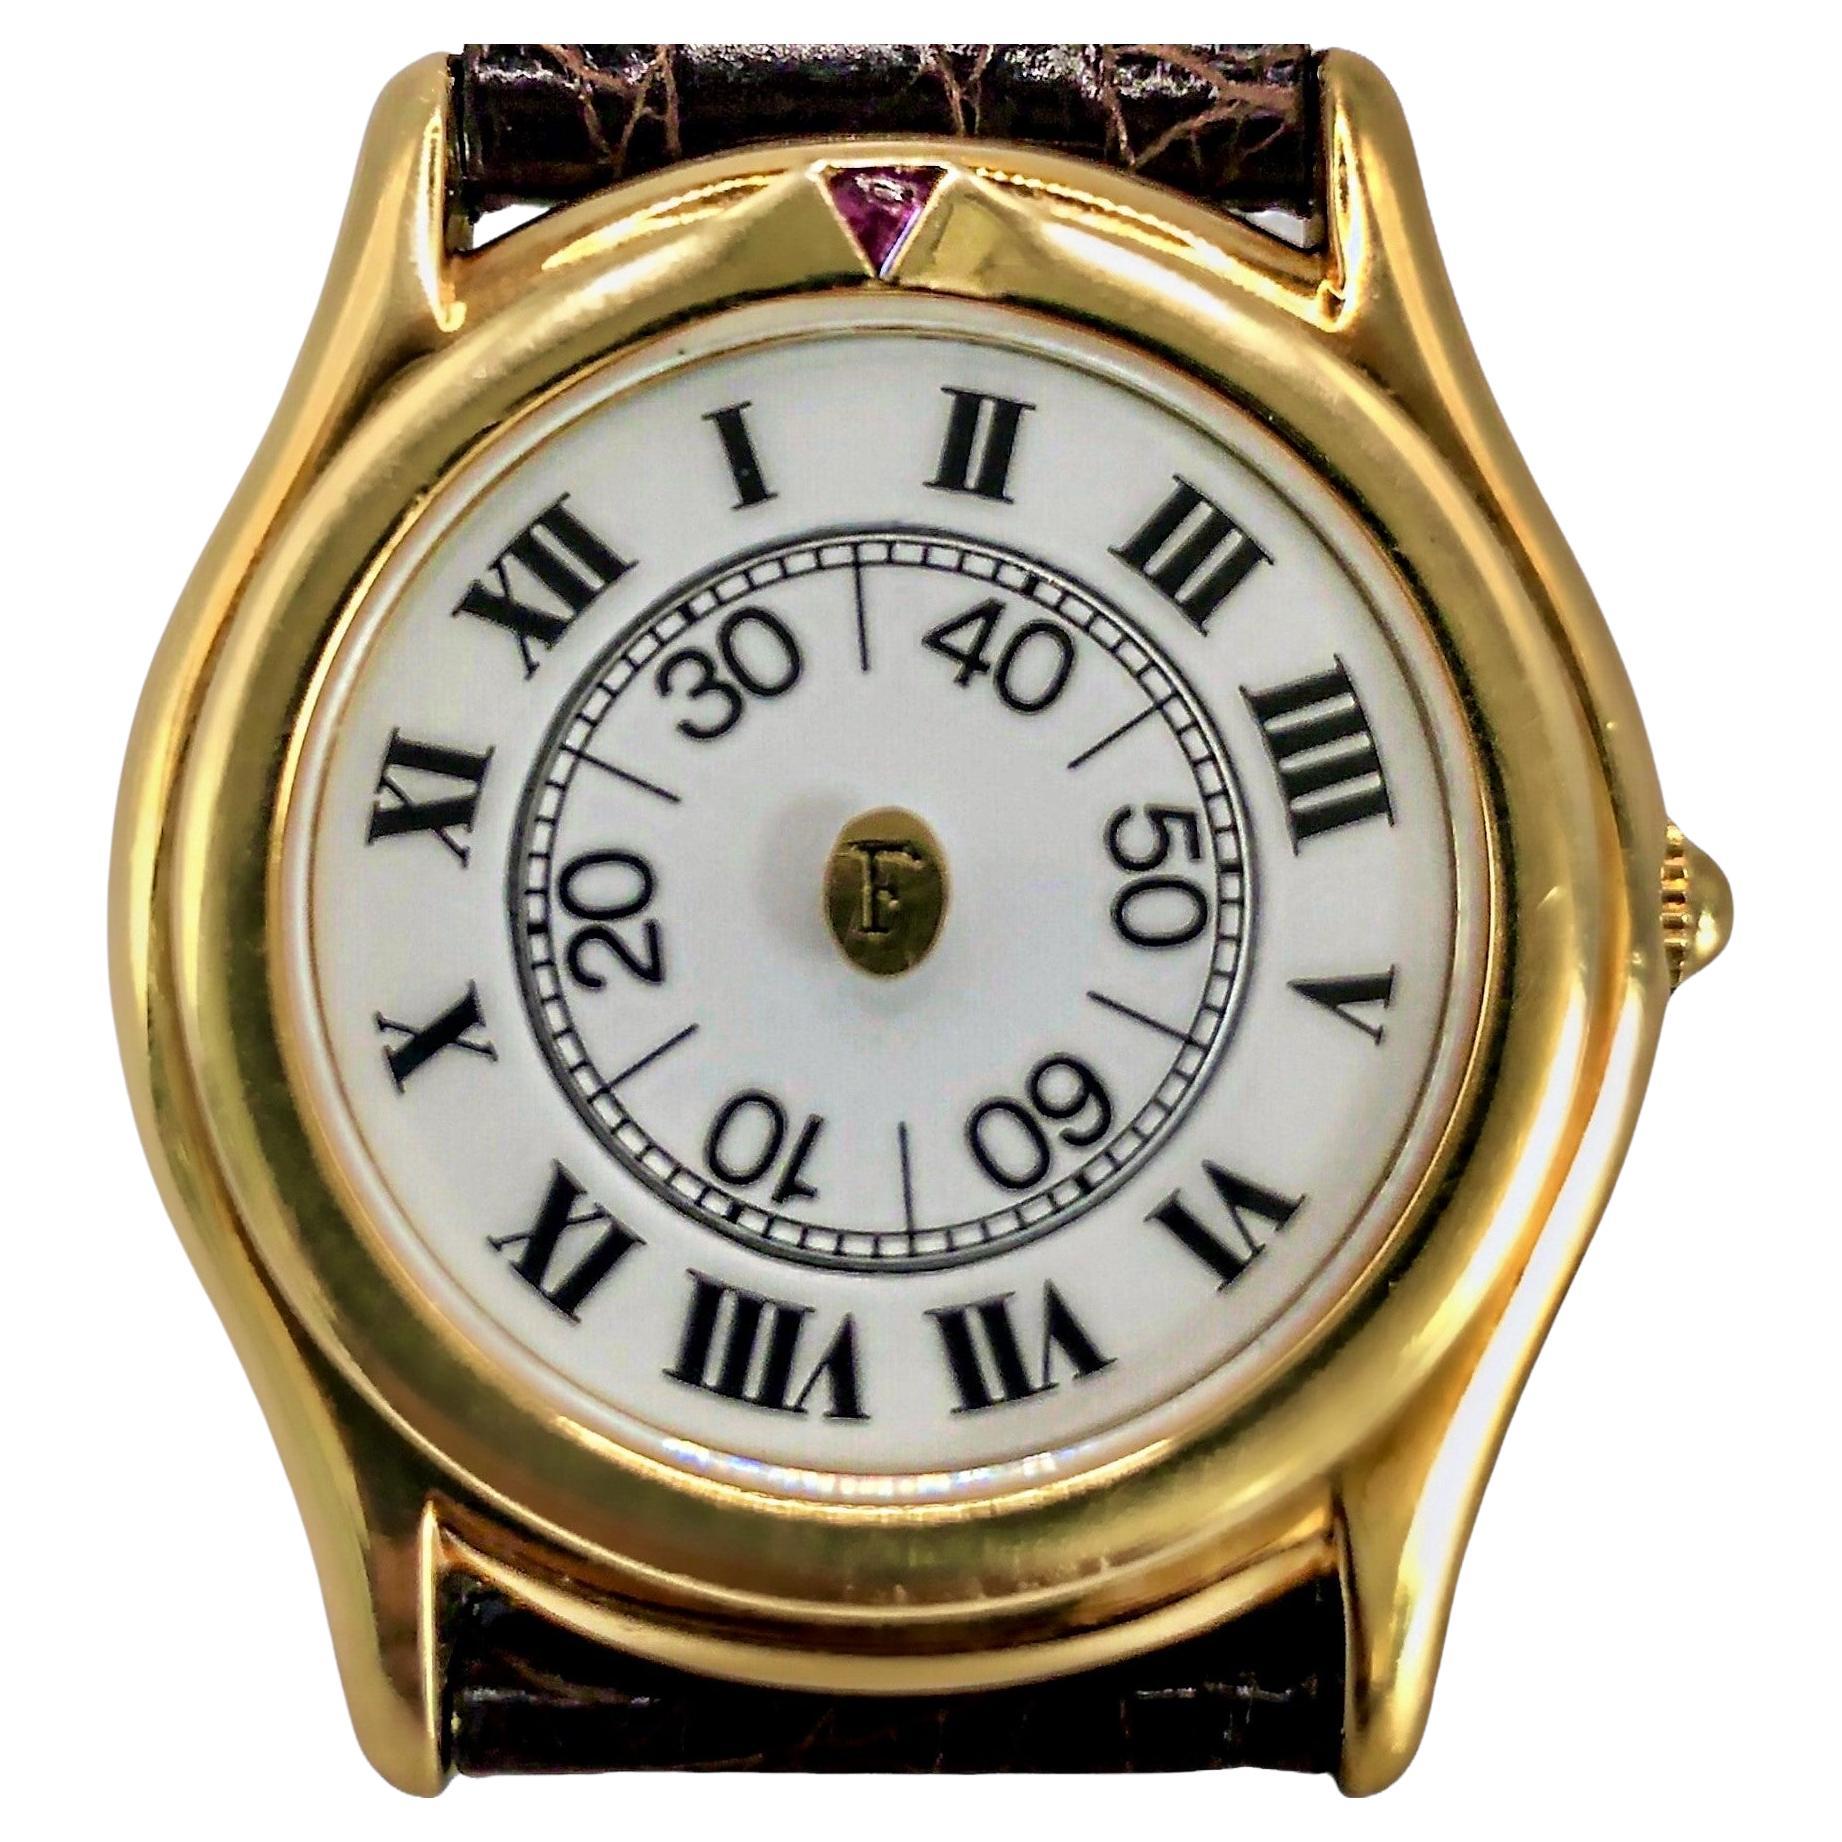 Unique 18K Yellow Gold Faraone Designer Watch with Ruby Marker